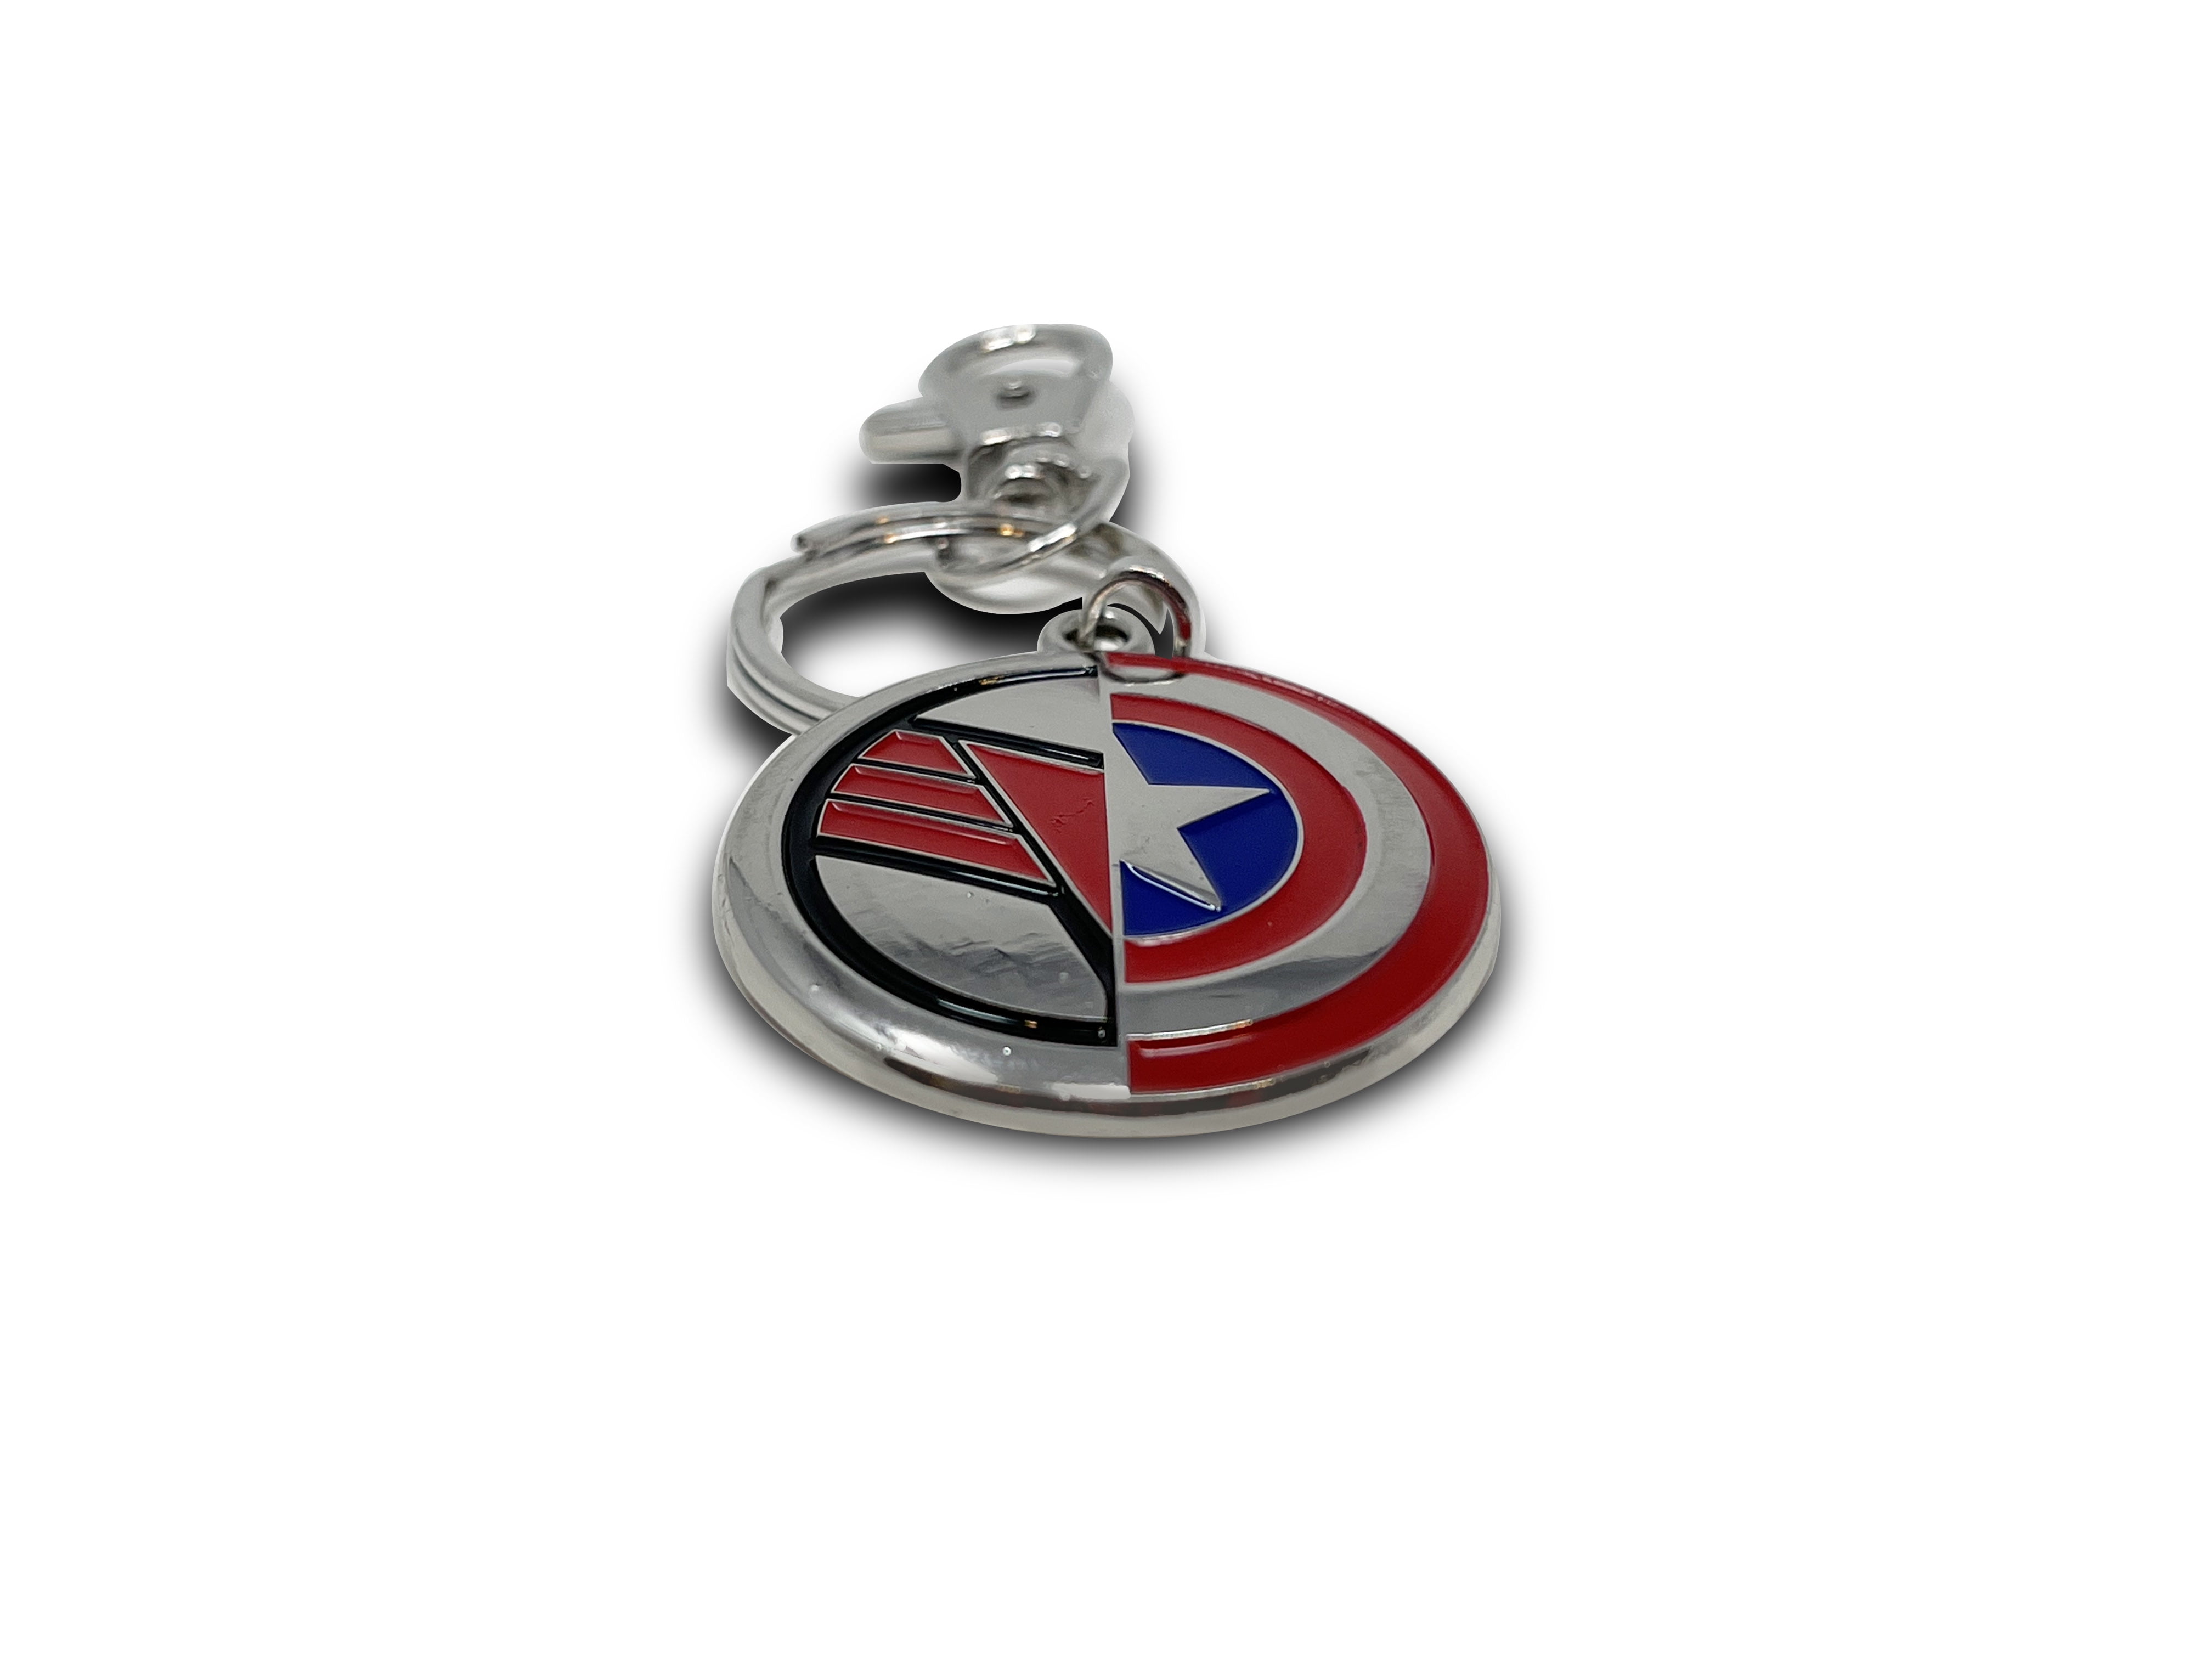 S.H.I.E.L.D Marvel's The Avengers Keychain Silver Keyring Pendants Glass Gifts 